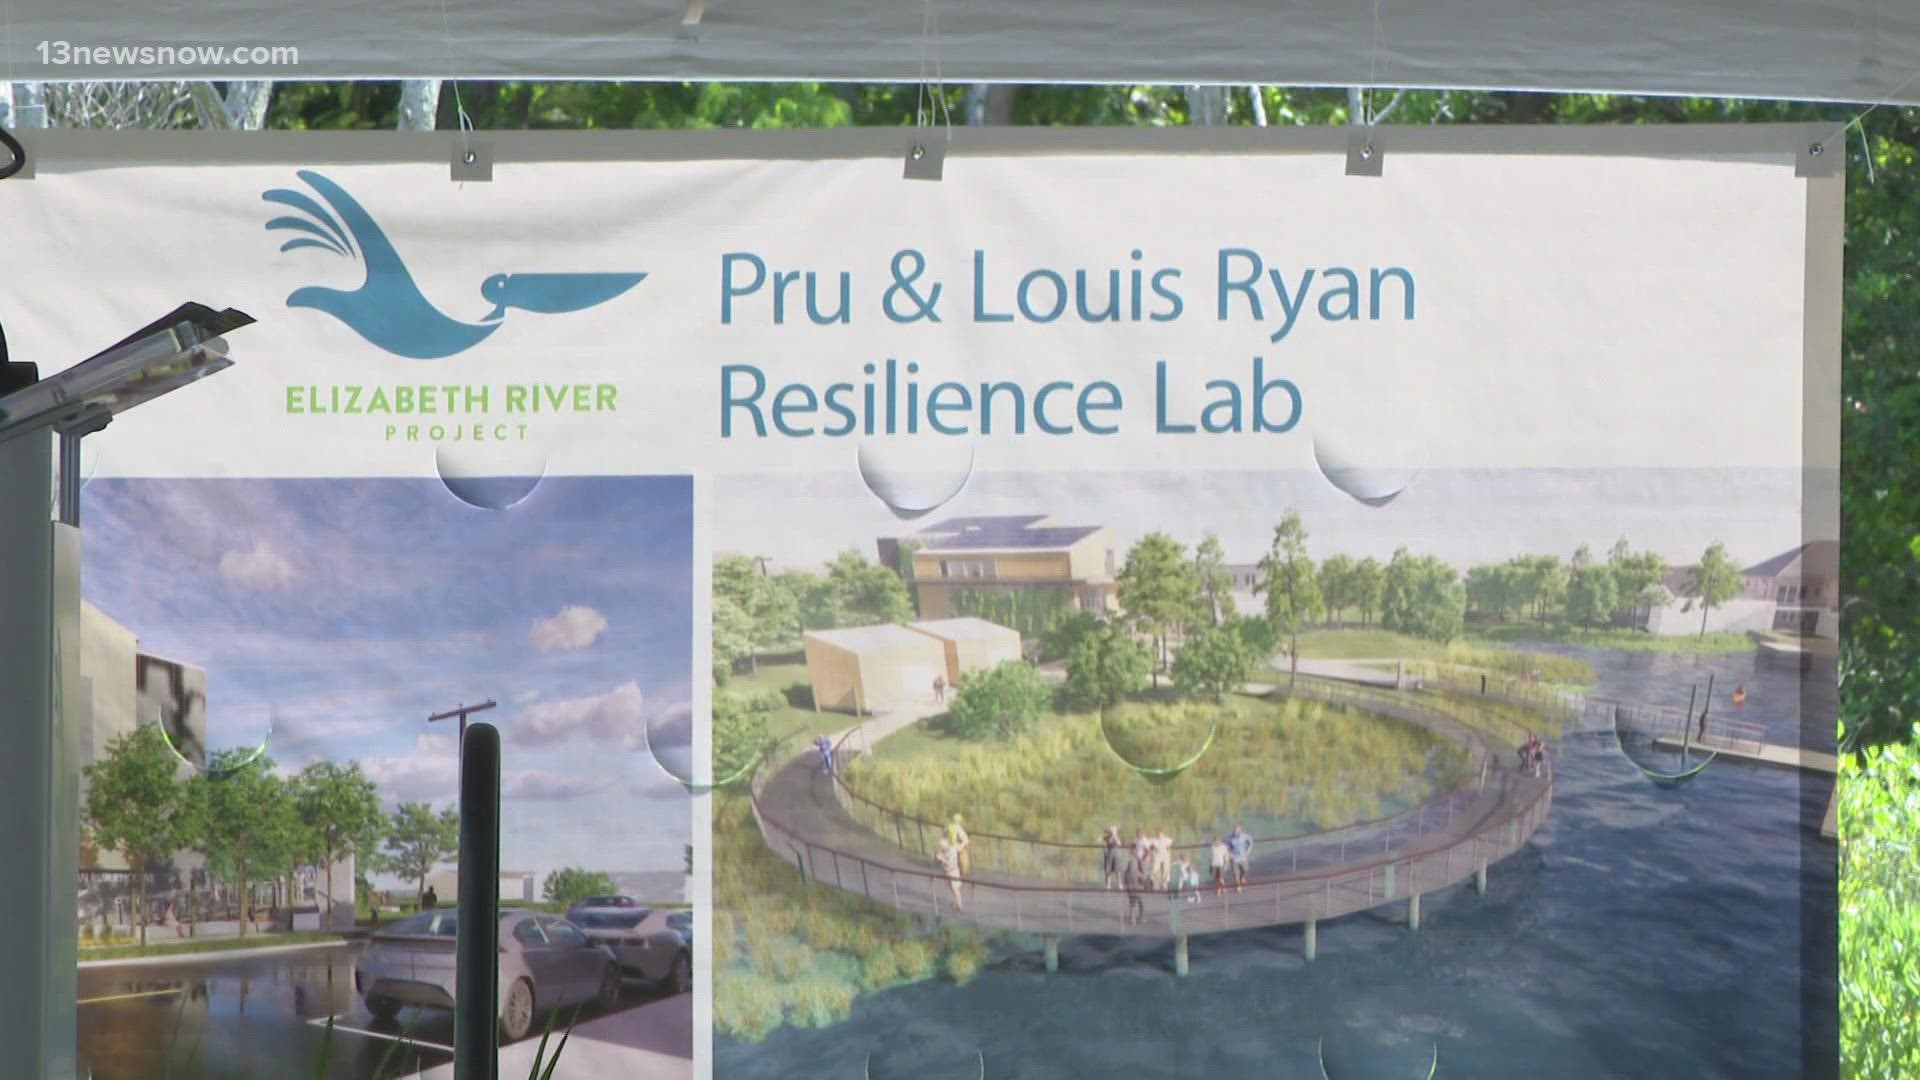 The $8 million living lab and learning park will let researchers see how to deal with climate change and sea level rise.